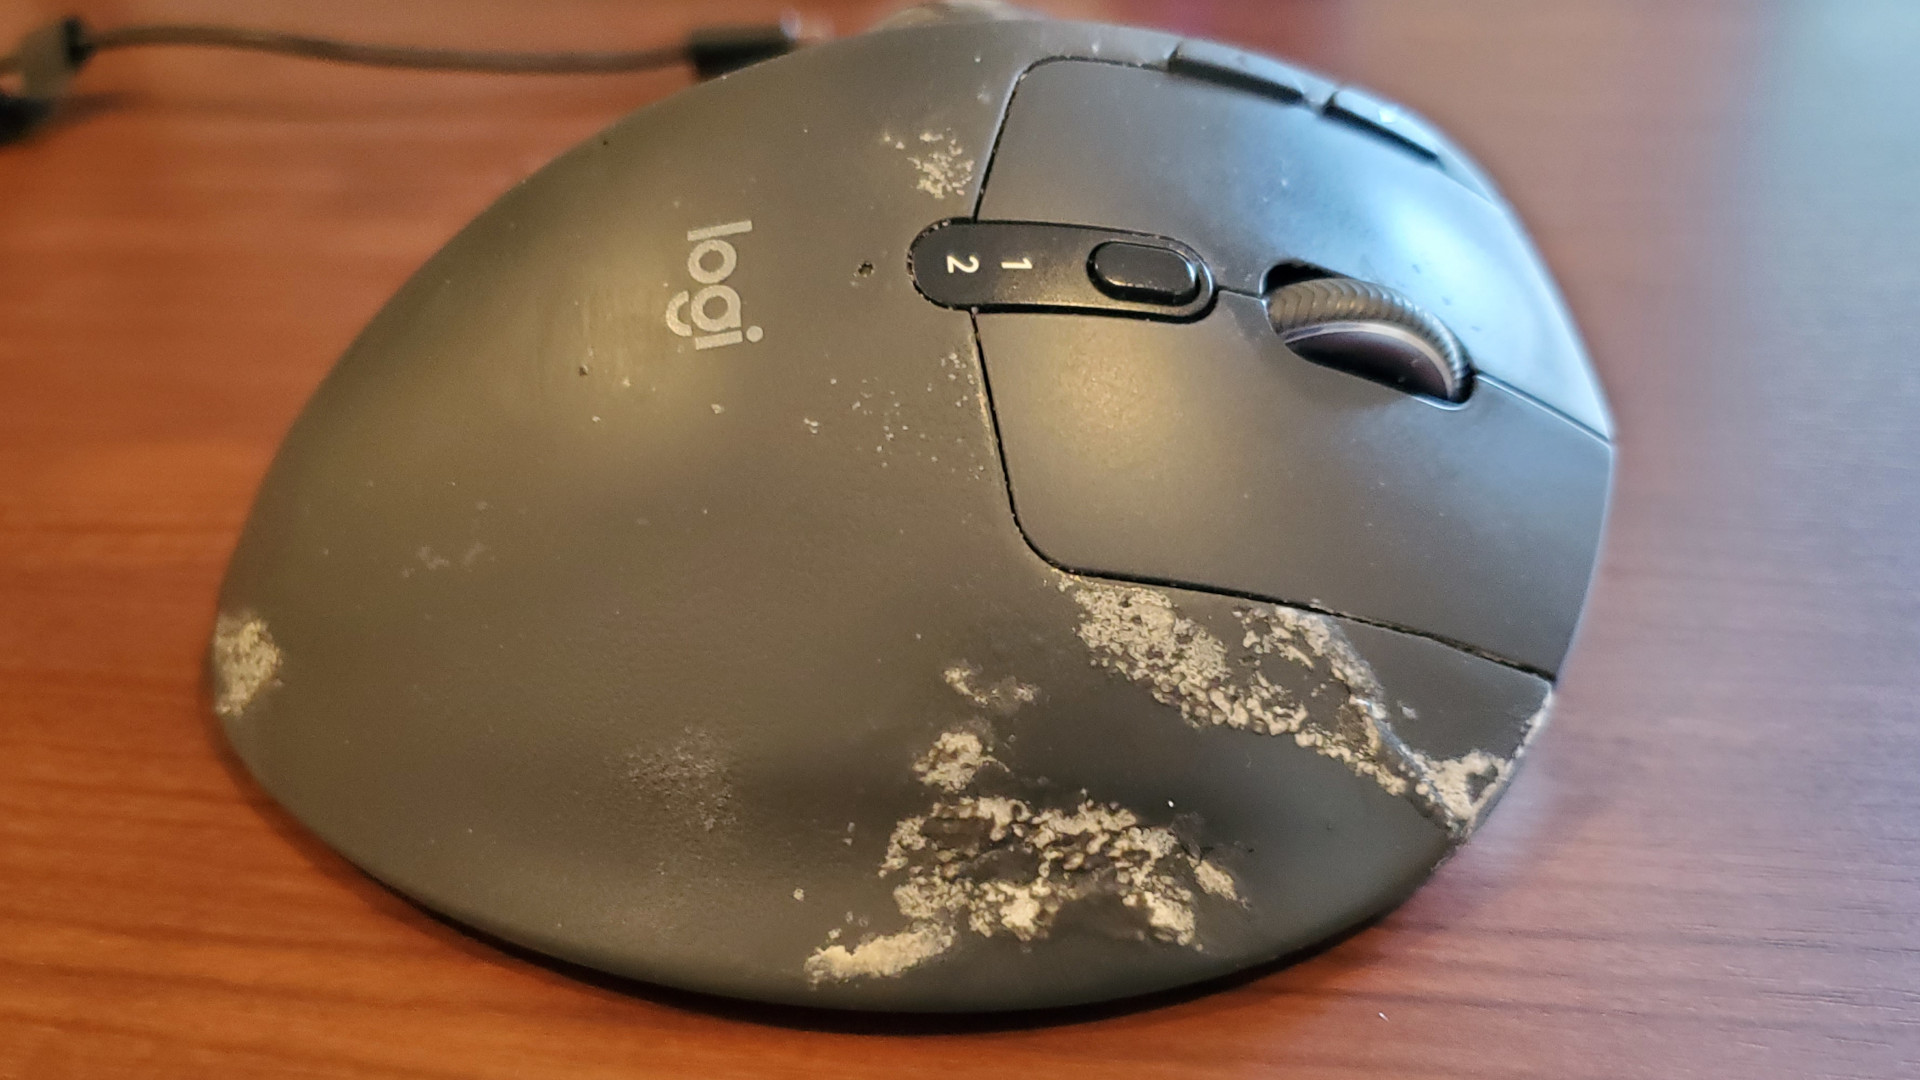 Rubber coating on my MX Master 3 deteriorated and got really sticky so I  applied a skin : r/logitech